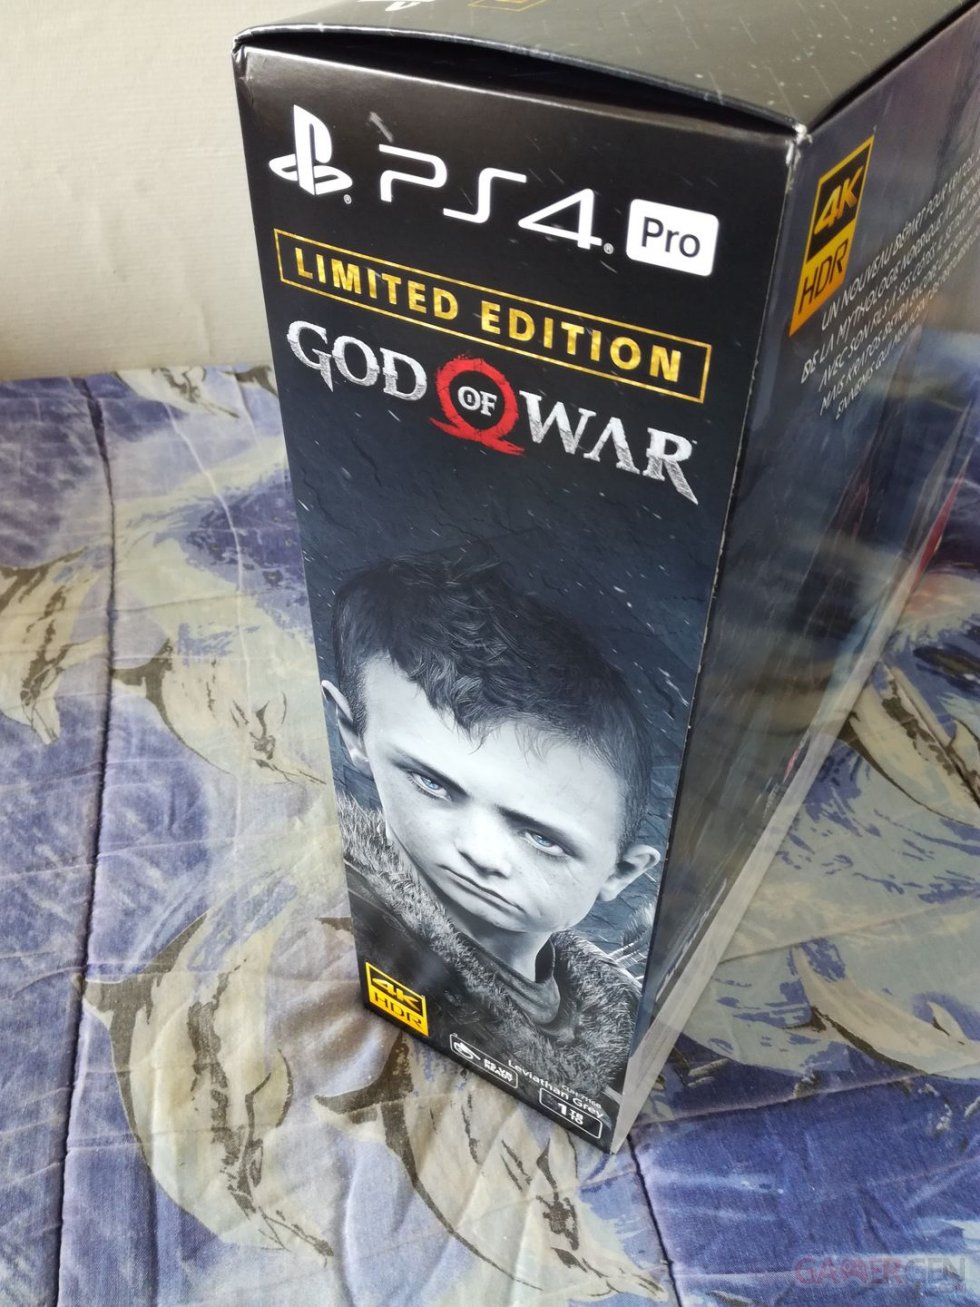 PS4-Pro-Leviathan-Grey-collector-God-of-War-unboxing-déballage-06-19-04-2018